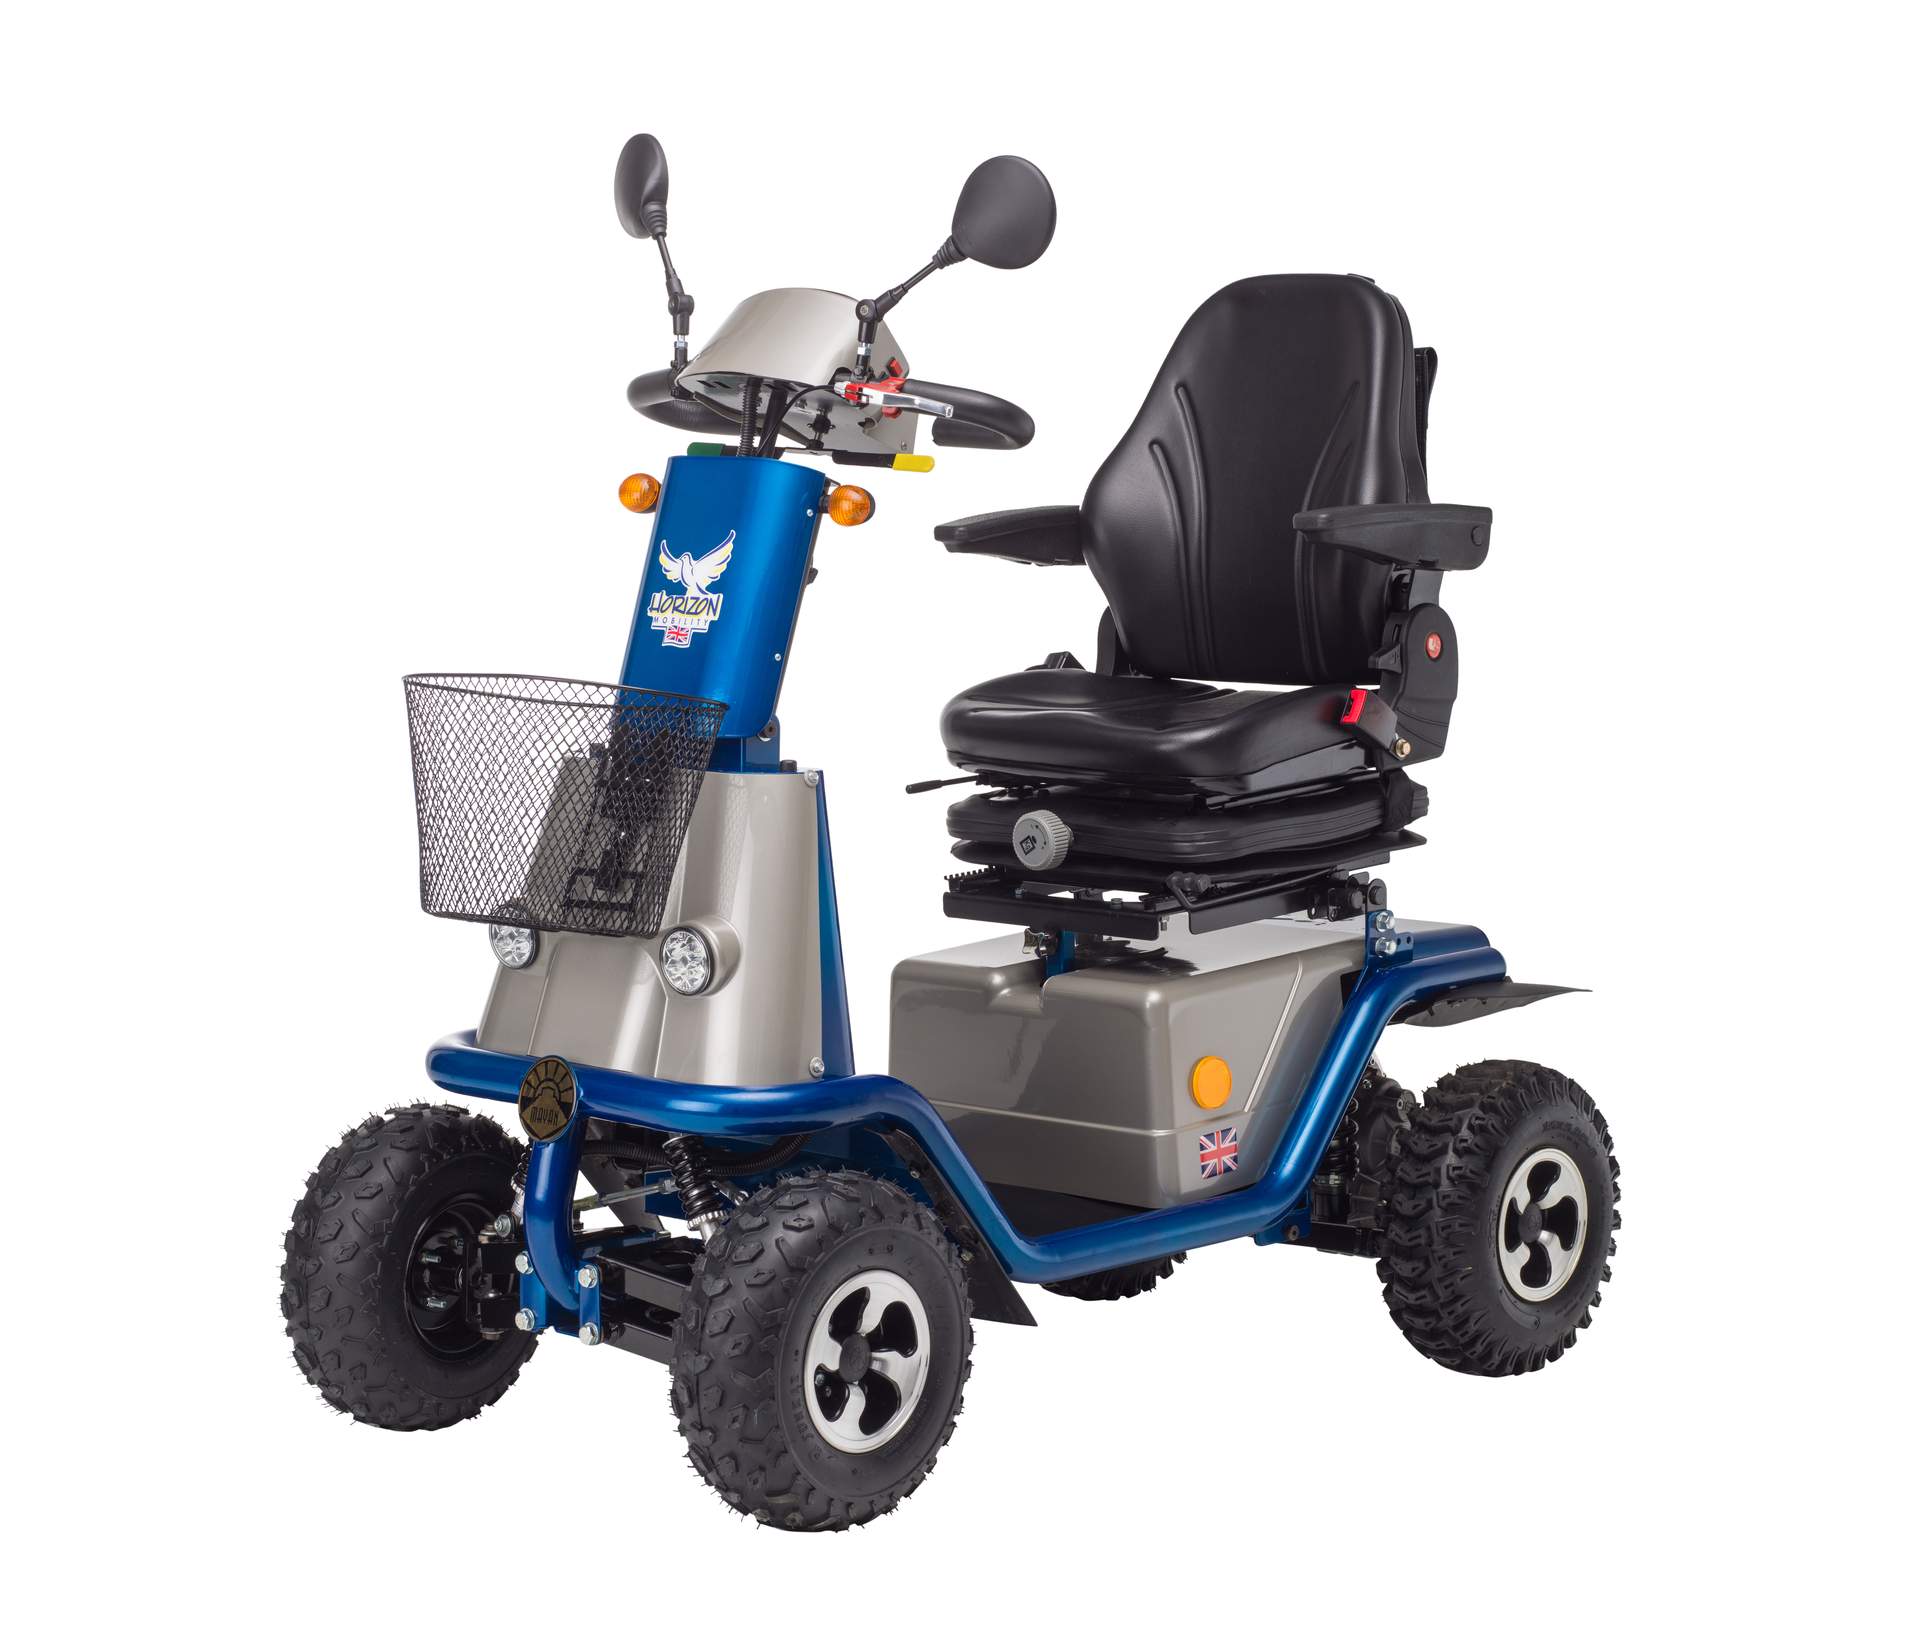 Mayan AC Series 3 All Terrain Mobility Scooter 1